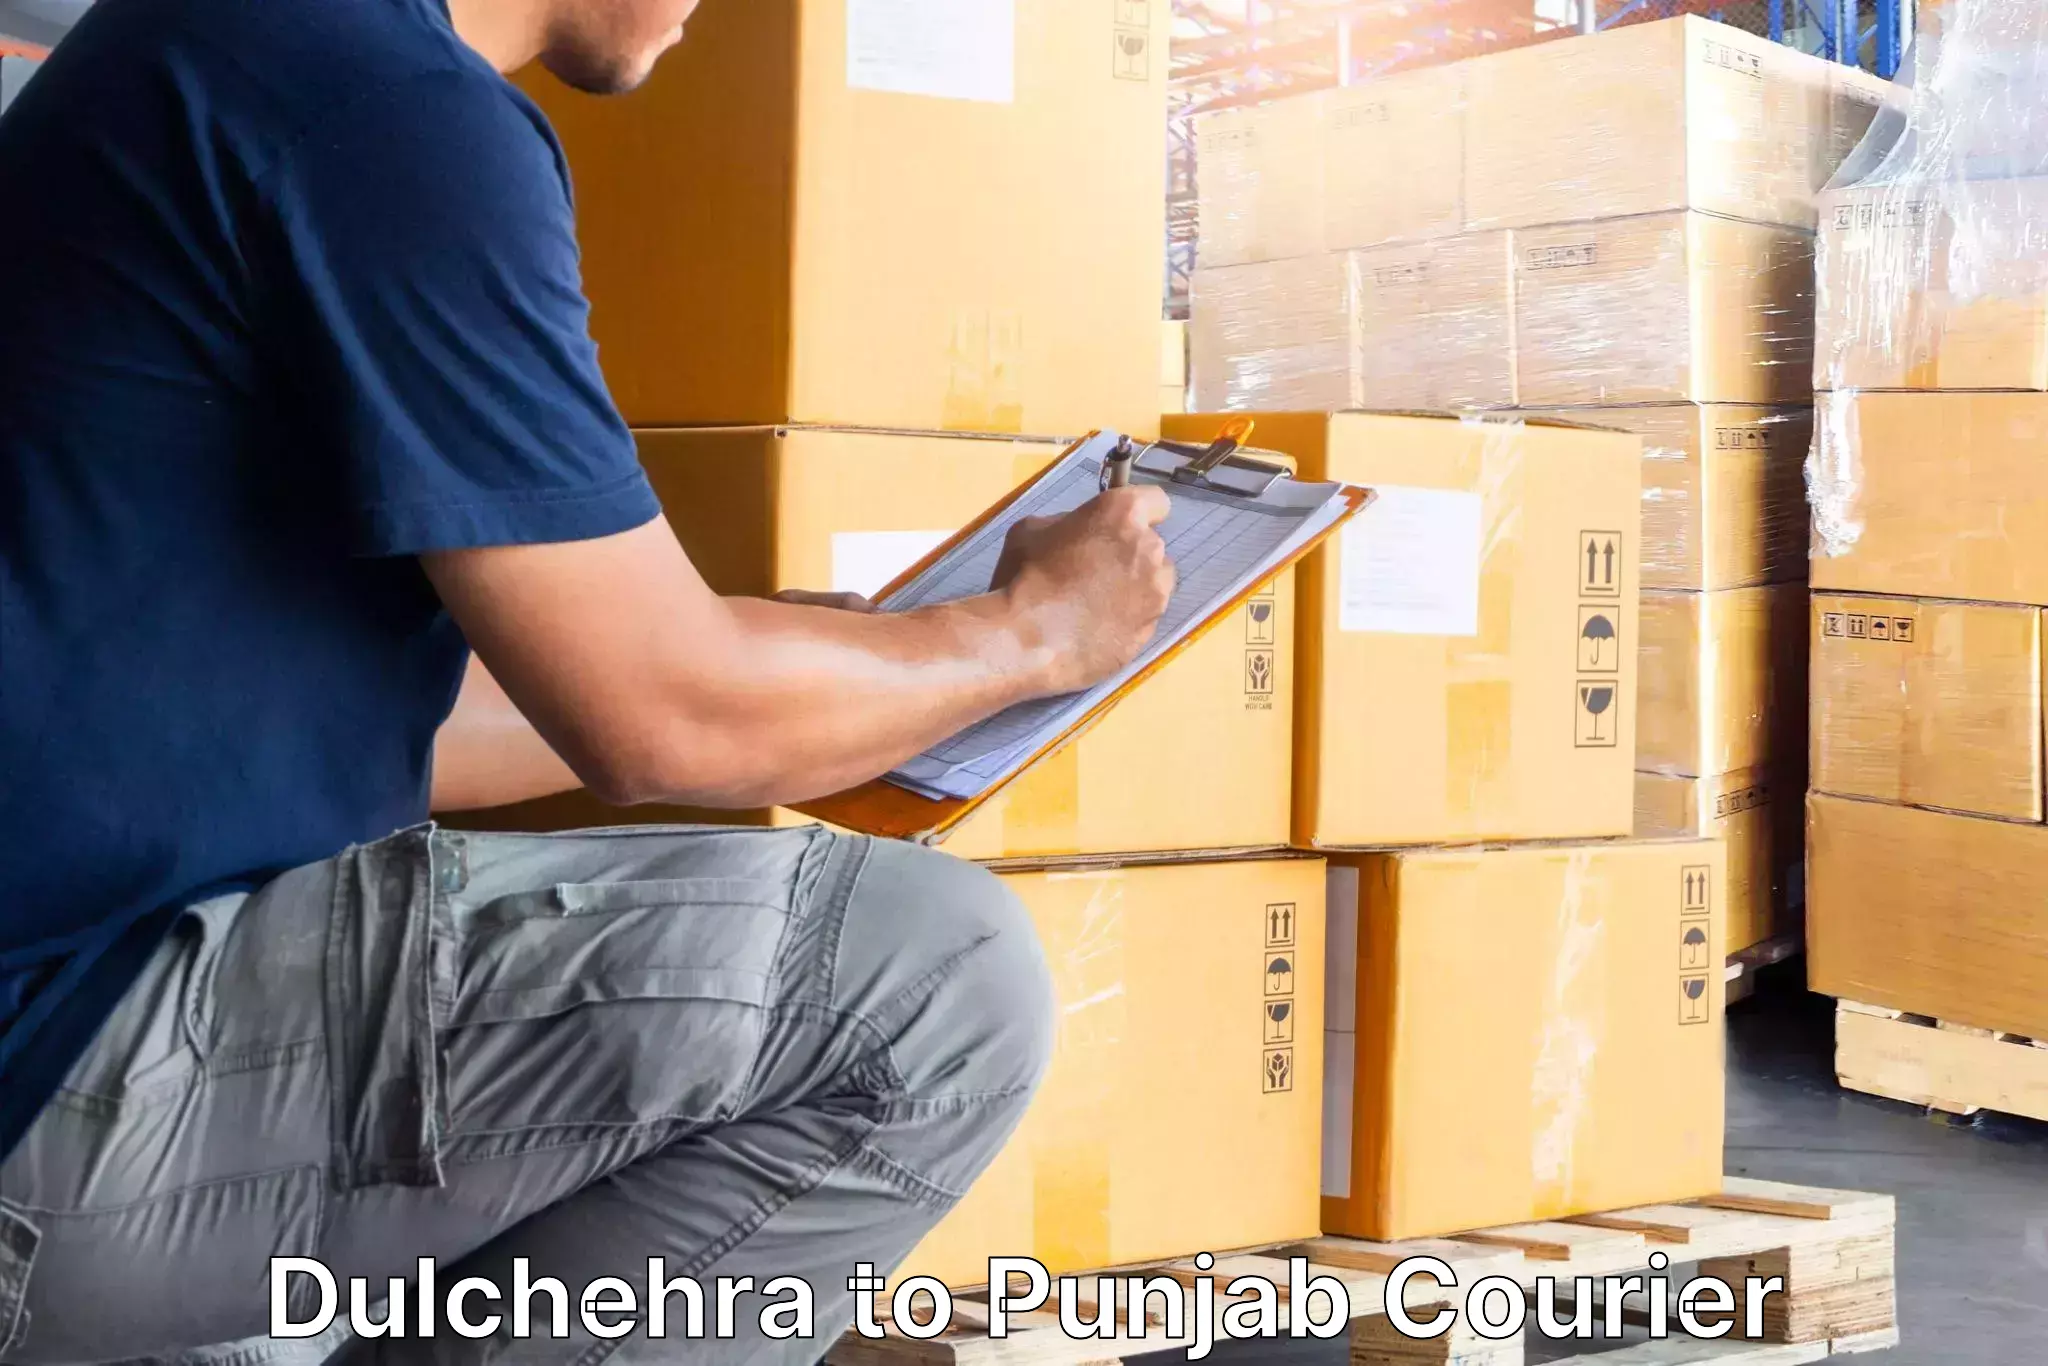 Professional movers and packers Dulchehra to Punjab